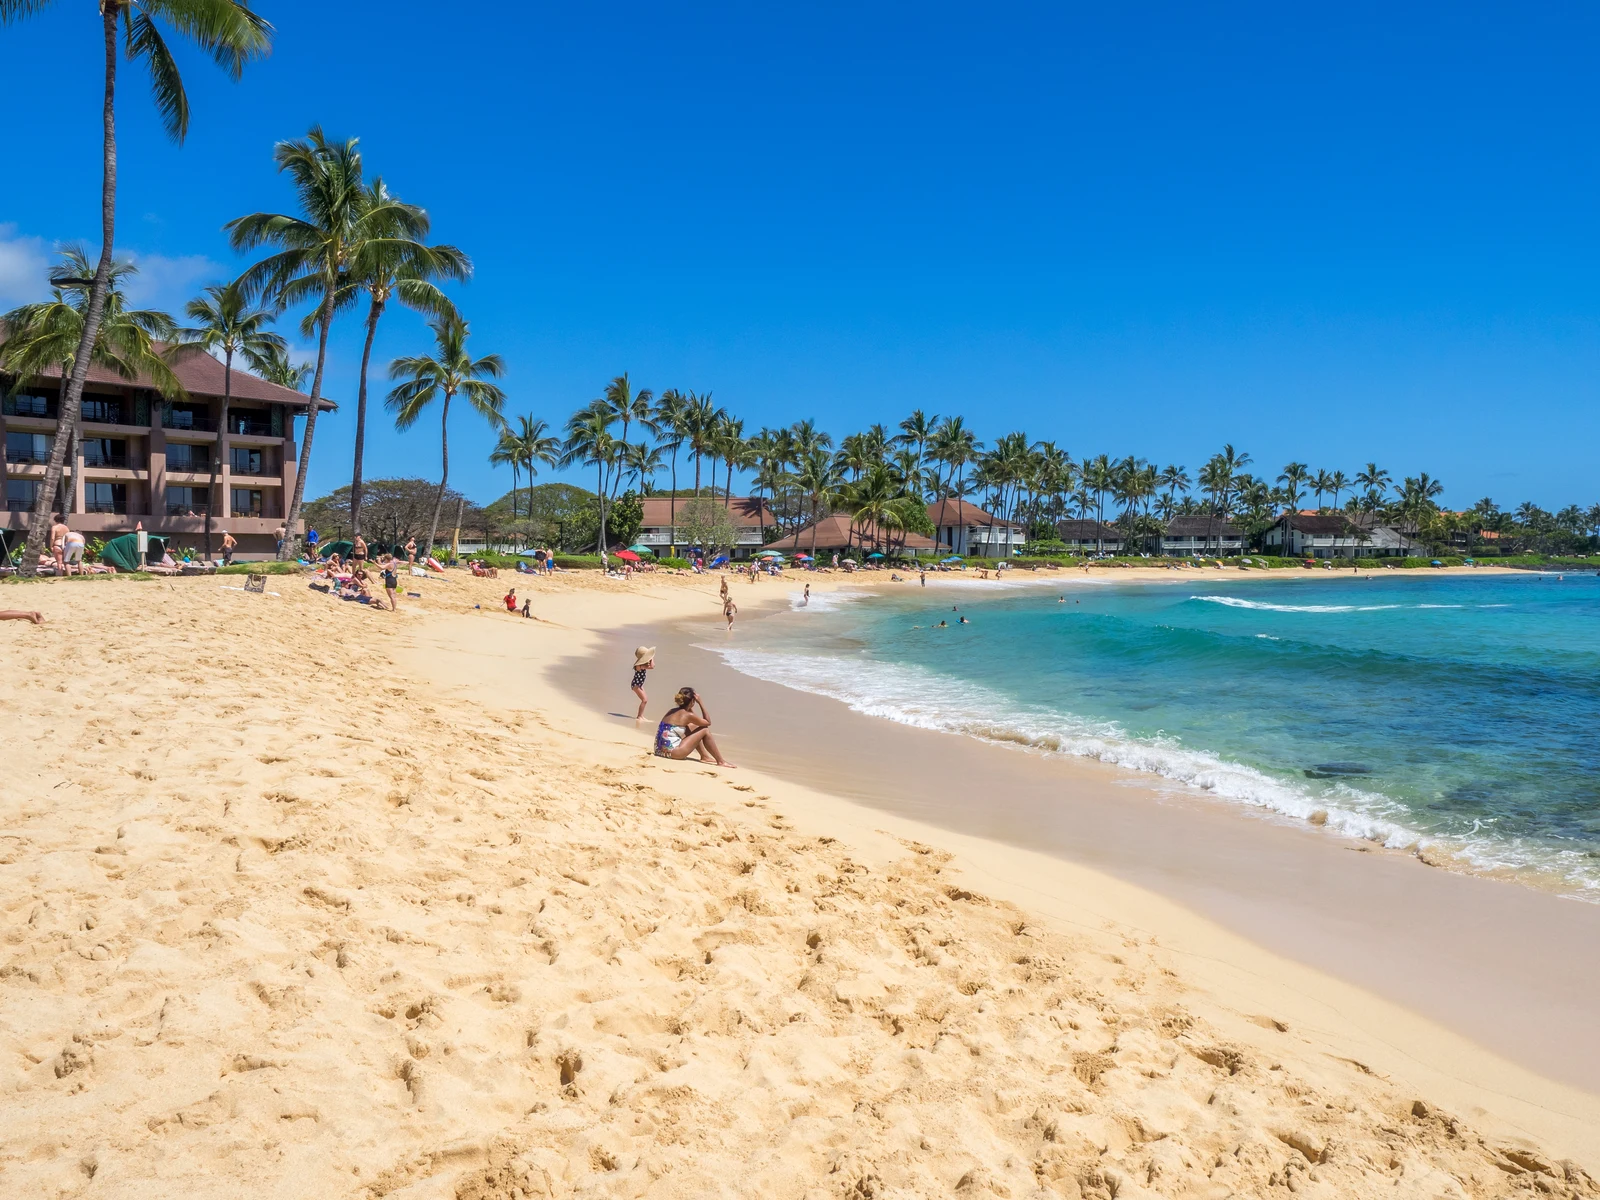 Adults and kids enjoying a hot summer day at Poipu Beach, one of the best beaches in Kauai, with a series of palm trees beside hotels and resorts